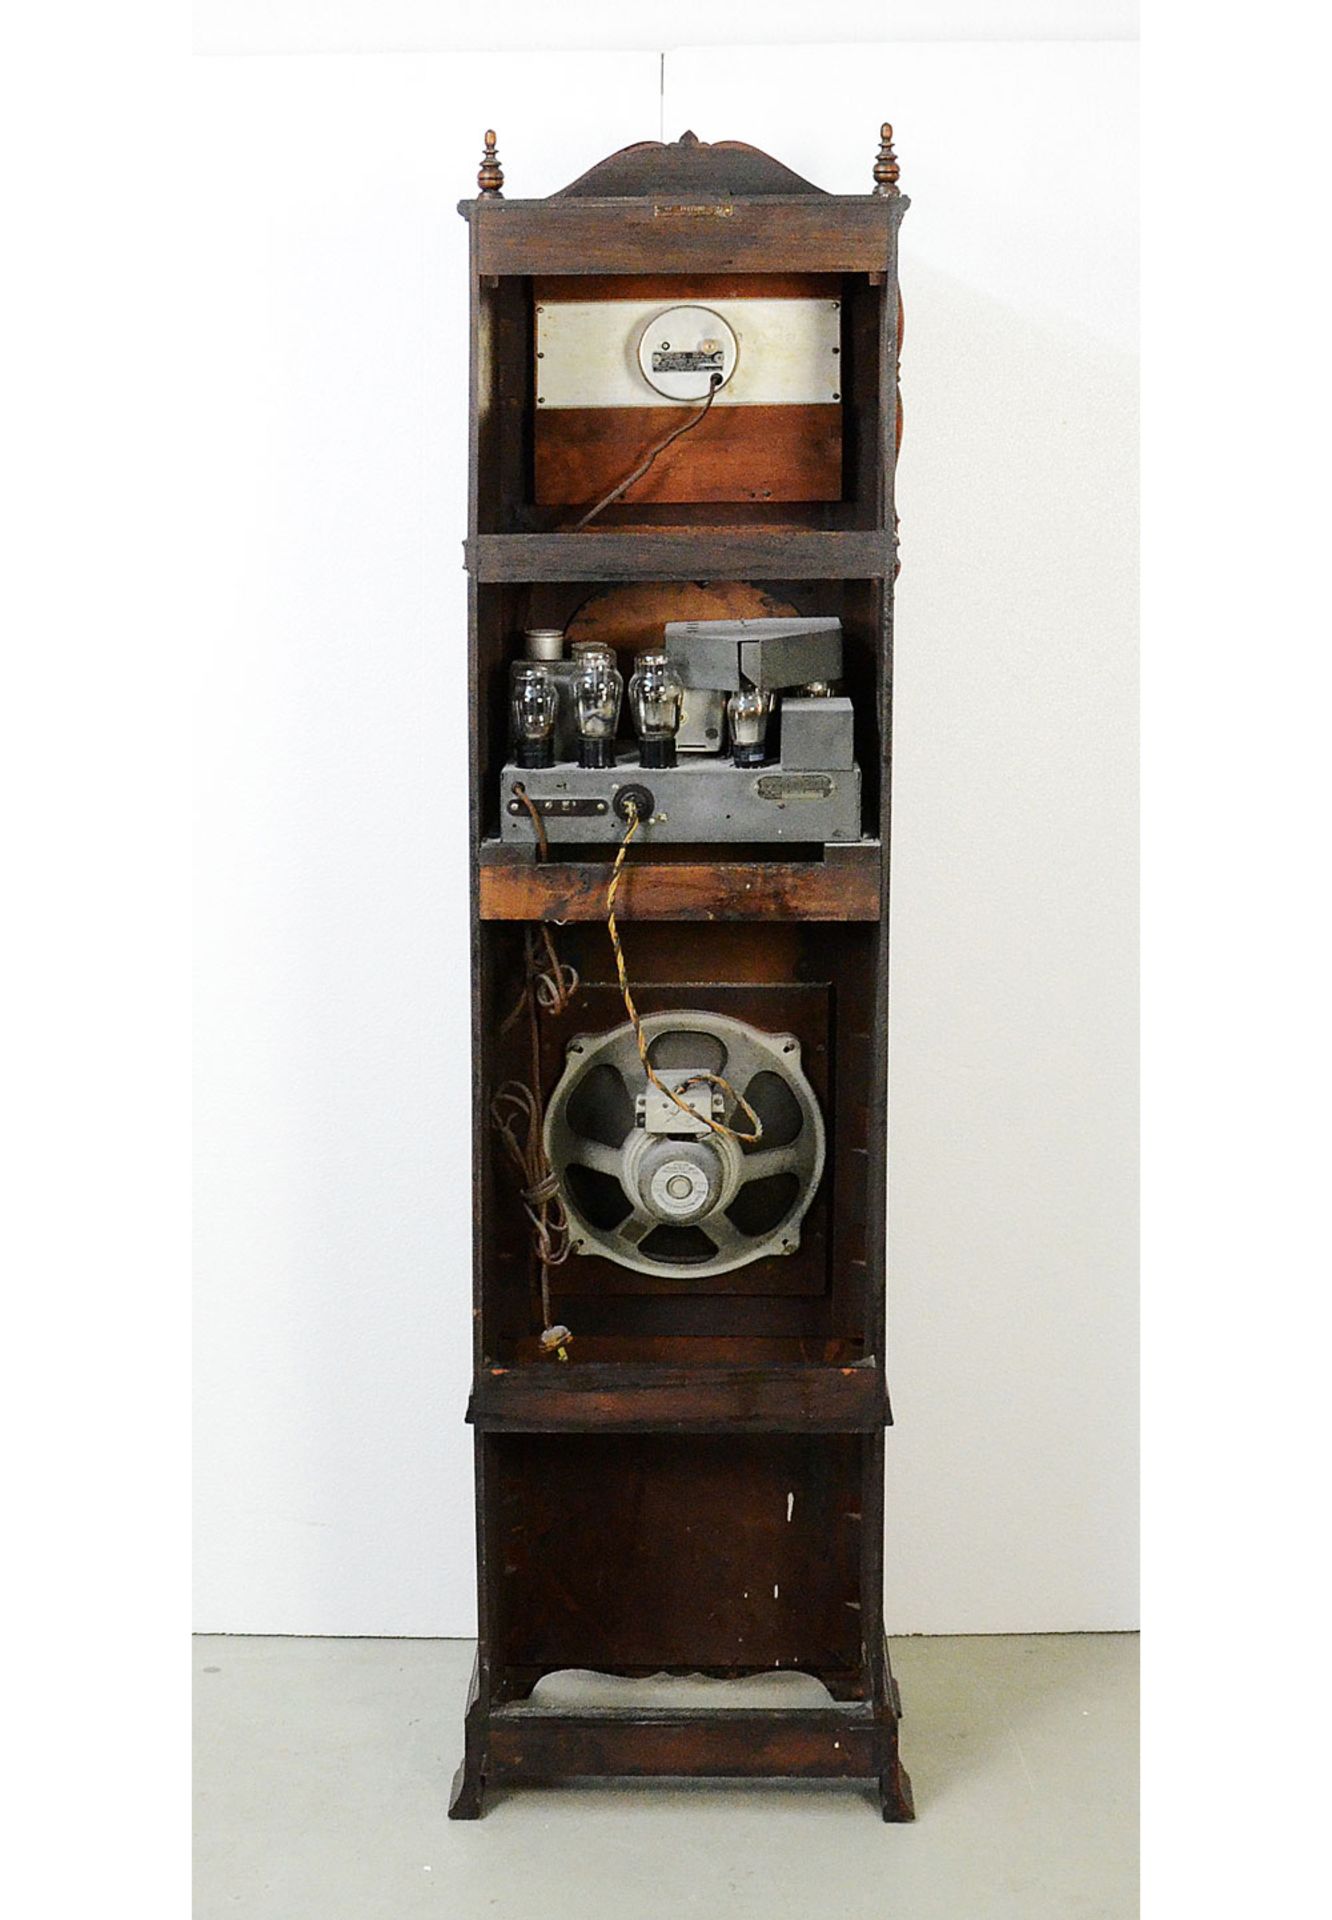 Electric Grandfather Clock Crosley Model 124 with AM-Radio - Image 5 of 7